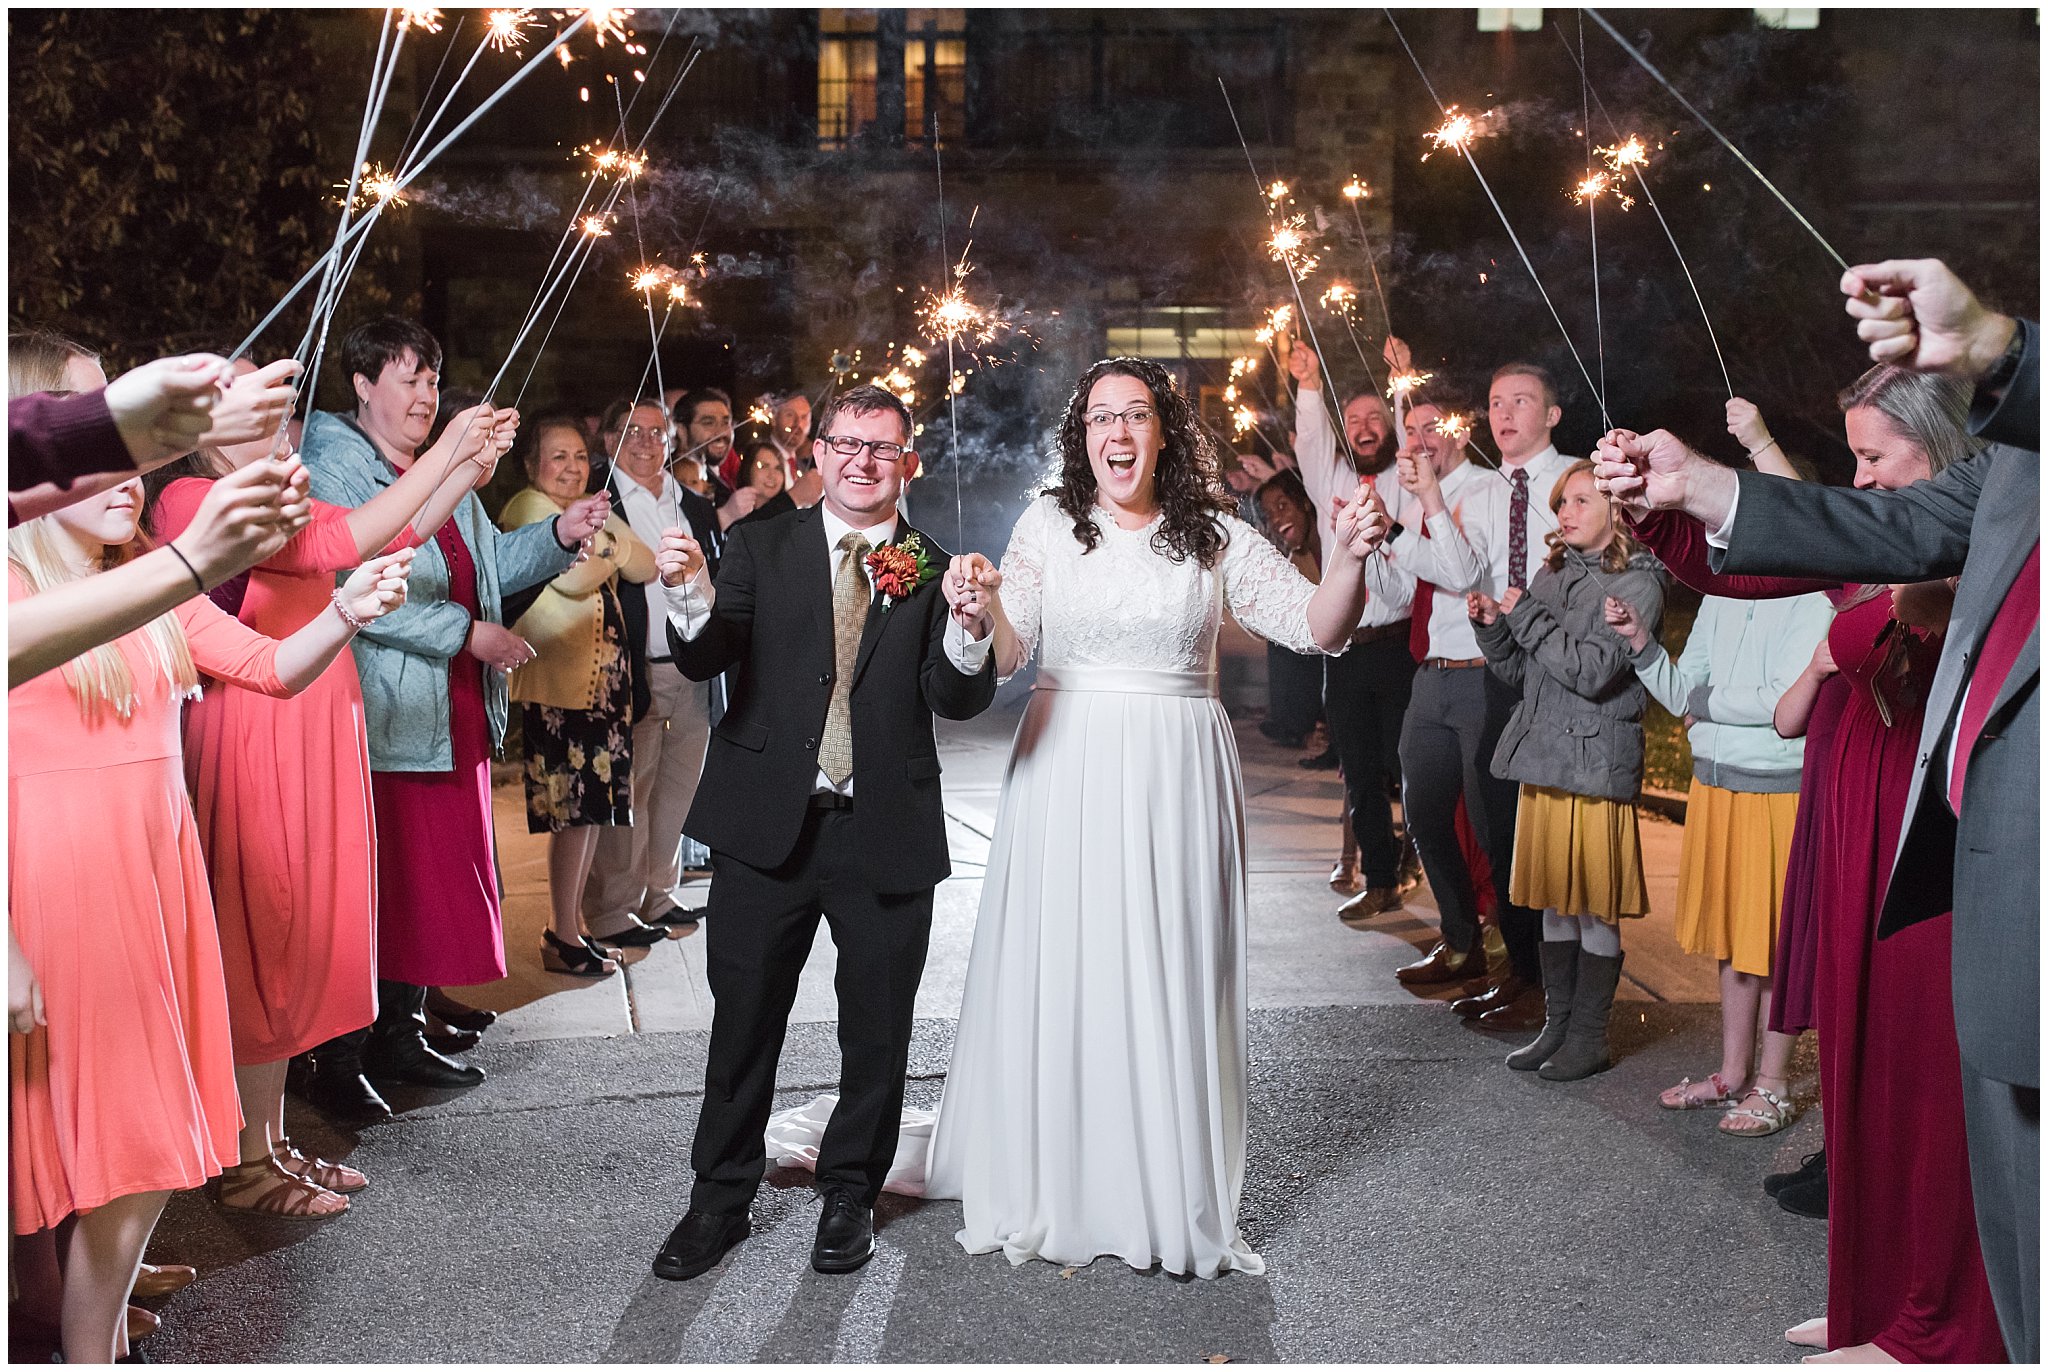 Bride and groom holding sparklers during sparkler exit sendoff in Logan Utah | Top Utah Wedding and Couples Photos 2019 | Jessie and Dallin Photography